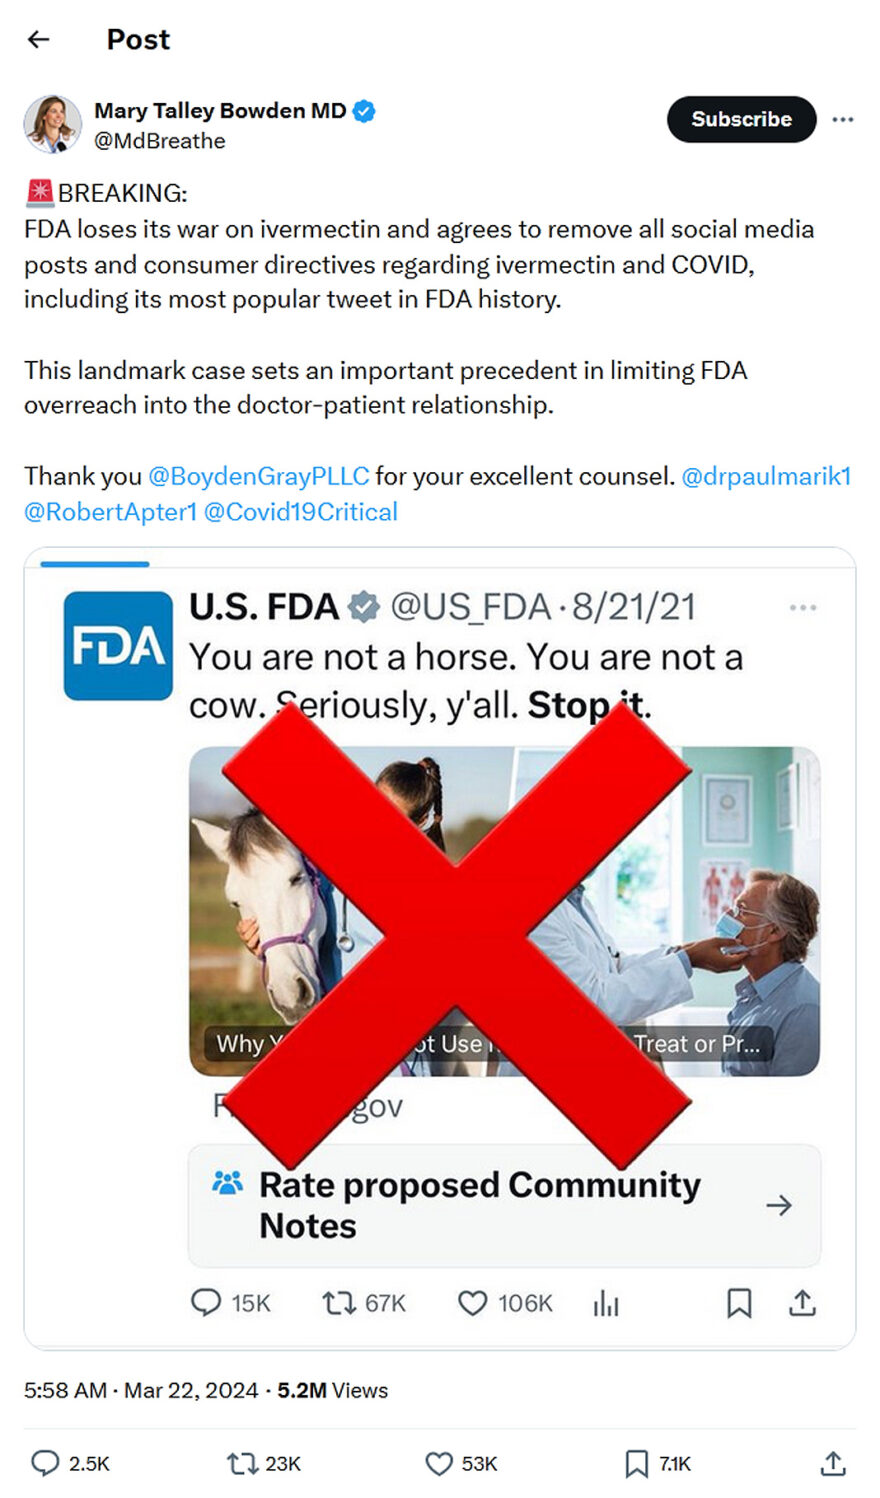 Mary Talley Bowden MD-tweet-22March2024-FDA loses its war on ivermectin